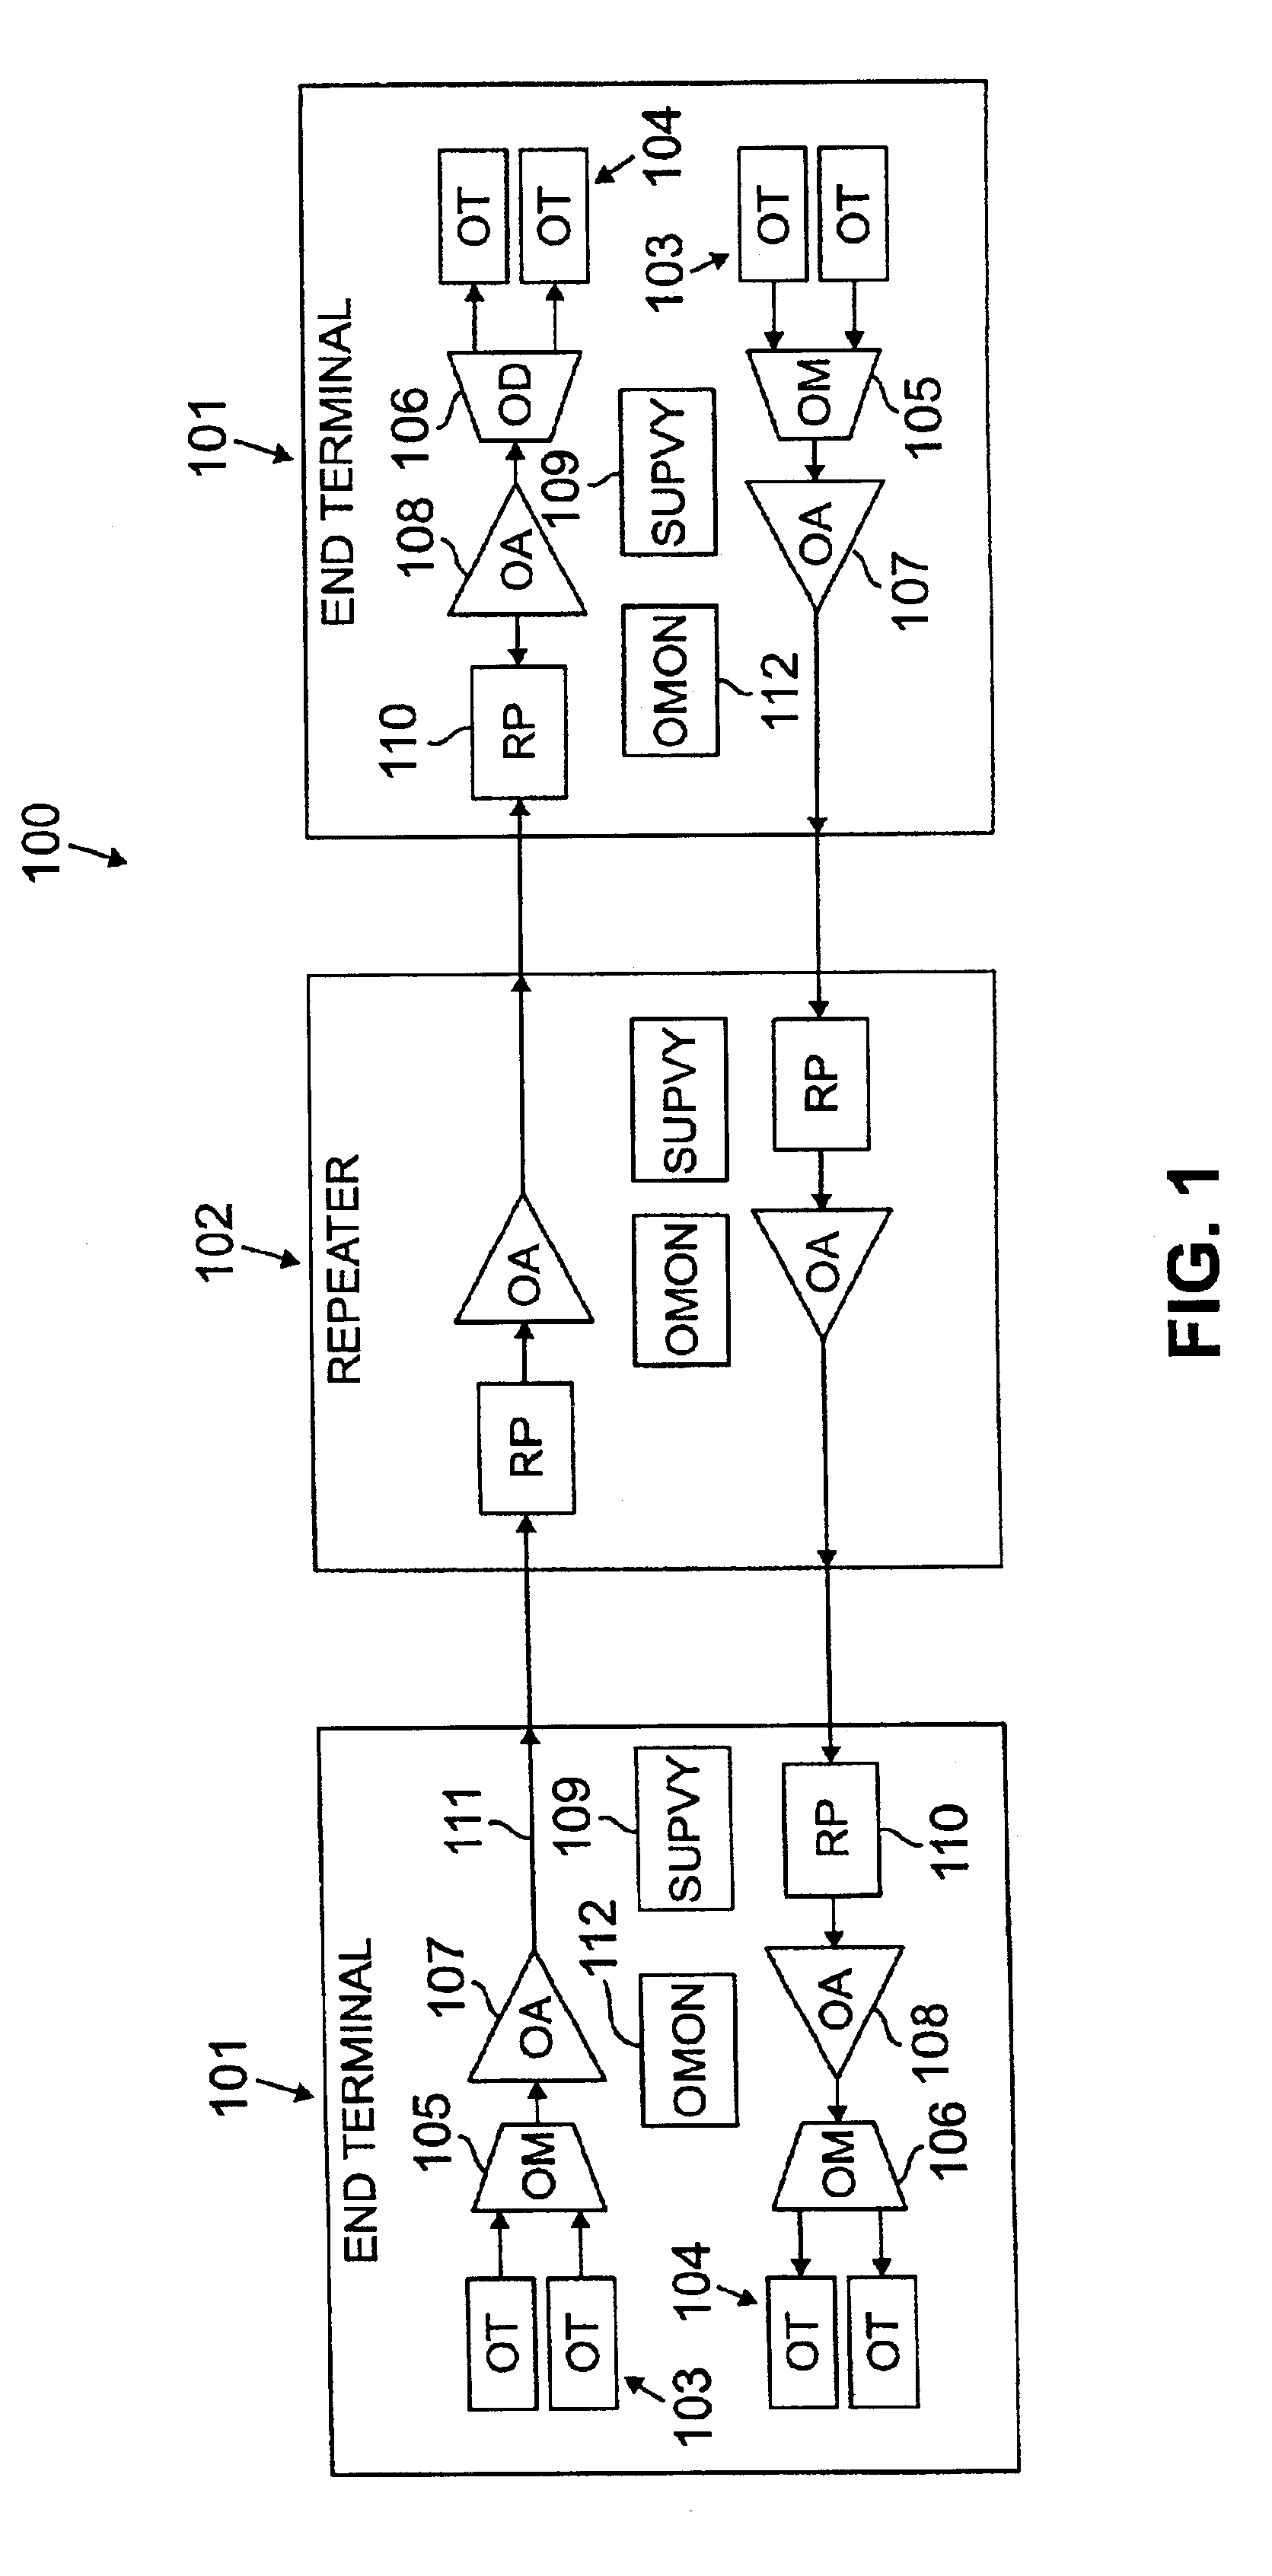 Method for automatically provisioning a network element